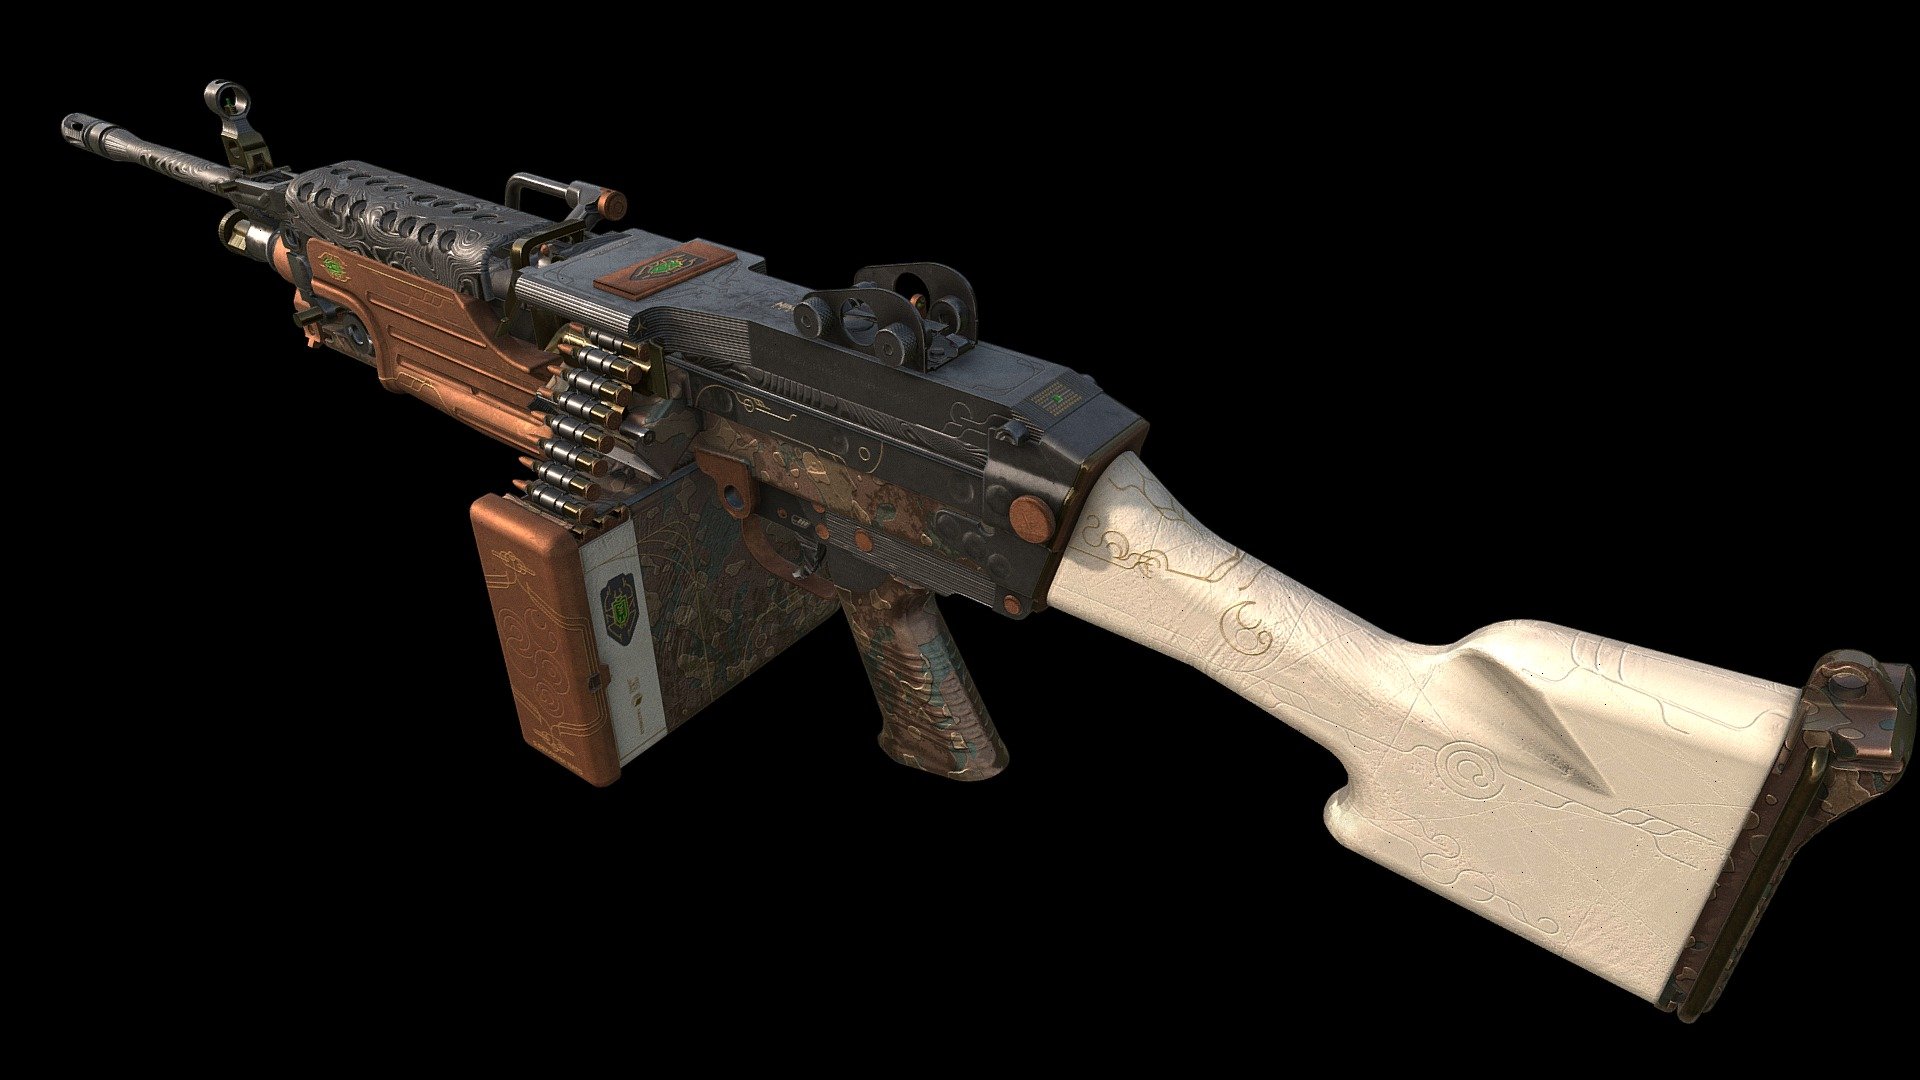 Concept texture/skin for Counter Strike 2 If you want to see my work ingame., vote for my workshop submissions here: https://steamcommunity.com/id/tanapta/myworkshopfiles/



This work includes complete texture/material set on a predefined ingame model.

My focus was and always will be to create medium-tier weapon skins, that are relatively neutral and not overly complicated. I know there are so many superb artists that create a true pieces of Art - I’m just a humble ui/ux designer that puts his soul to create a niche of guns that fit my needs.

Like all of my work, I will adapt this style to various guns with changes and adjustments where it seems necessary (for example additional material because of model complexity etc).

Much love, Tanapta - M249 - Nimble (CS2) - 3D model by tanapta 3d model